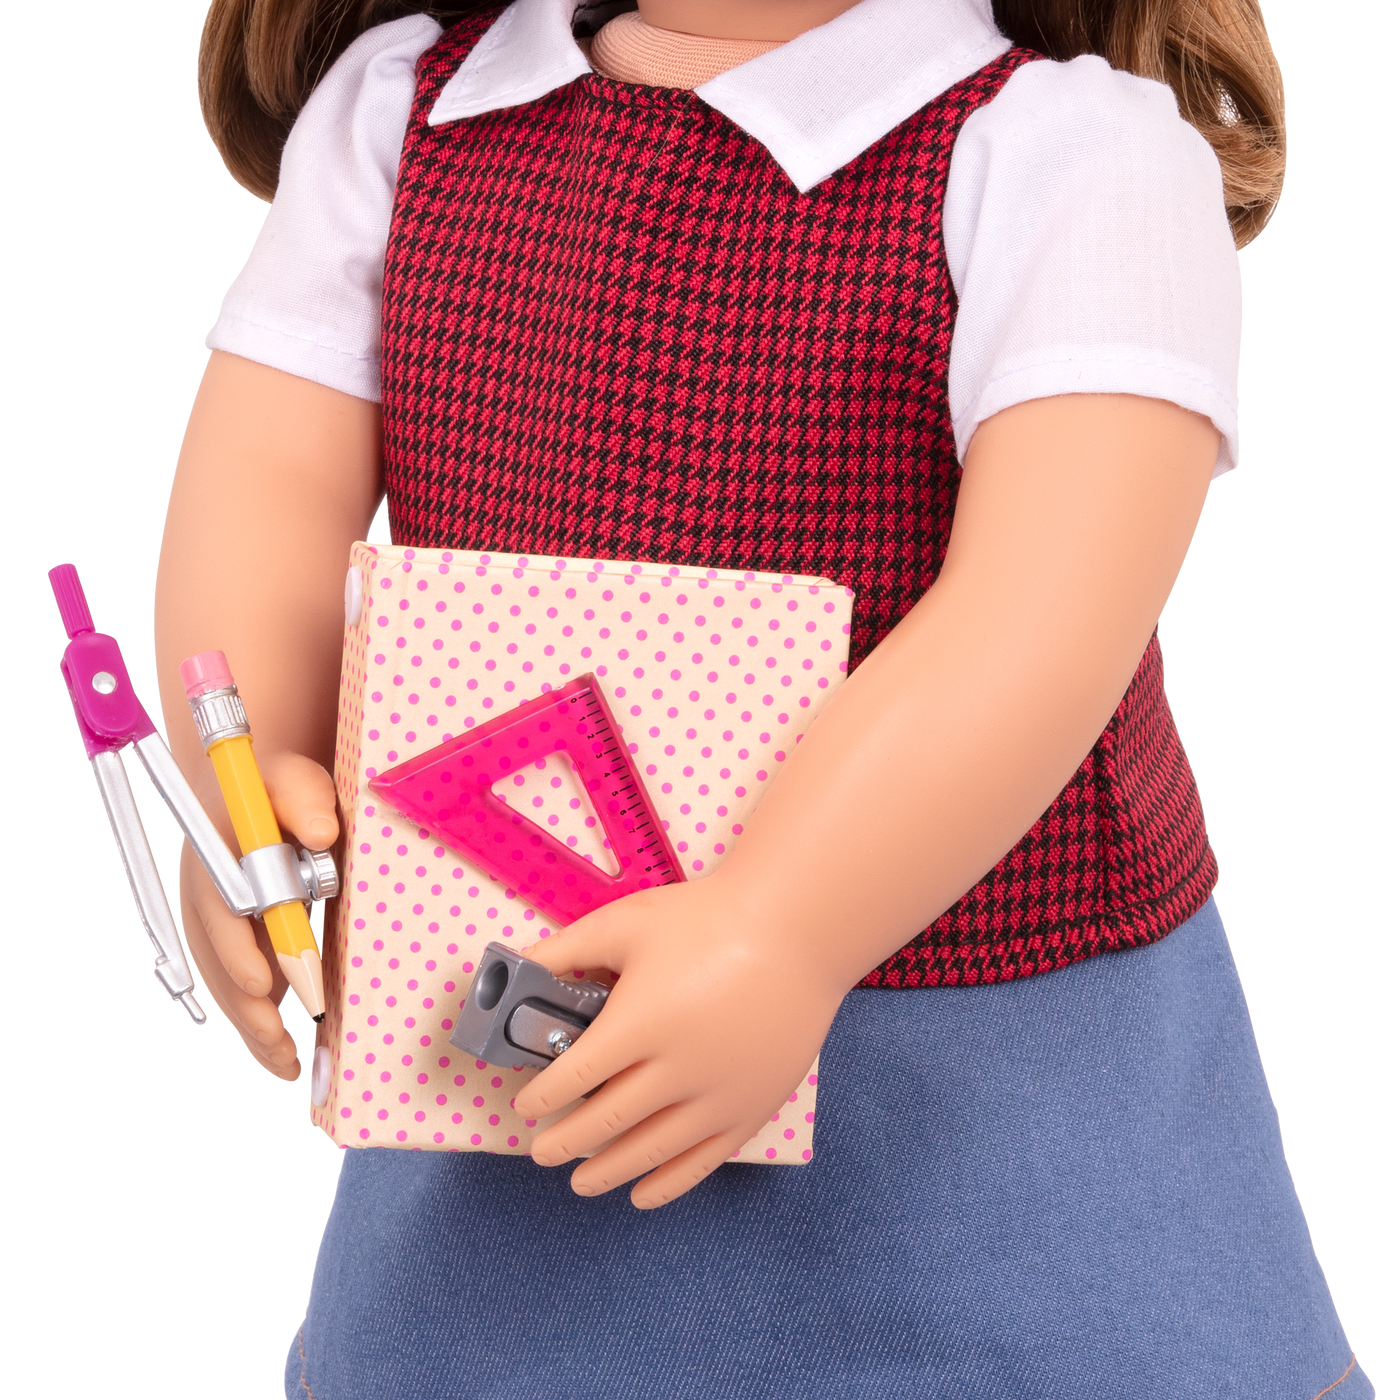 Talent and Mathematics School Supplies for 18-inch Dolls